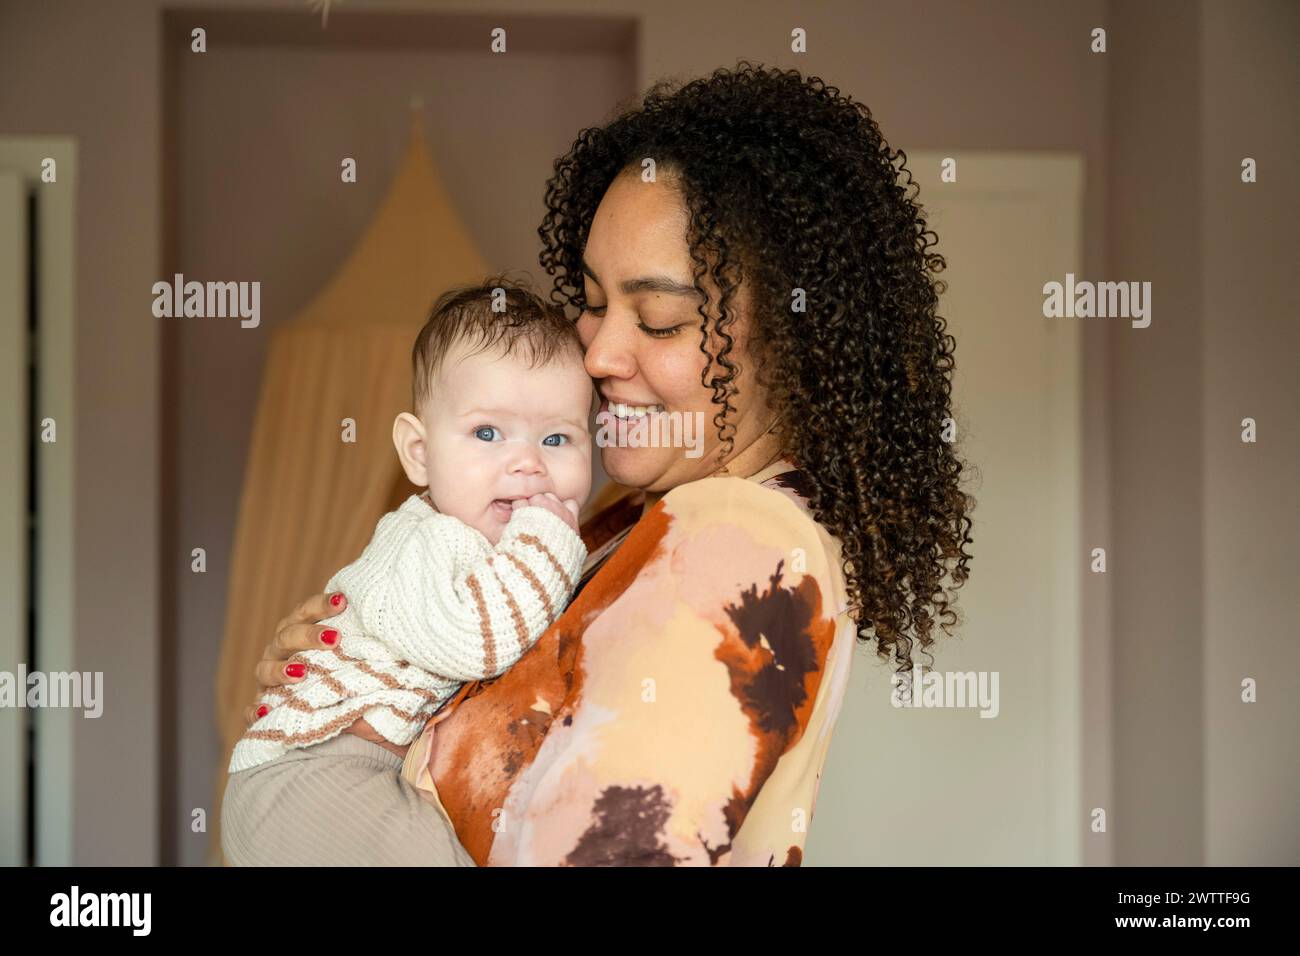 Loving mother holding her baby close with a warm smile. Stock Photo